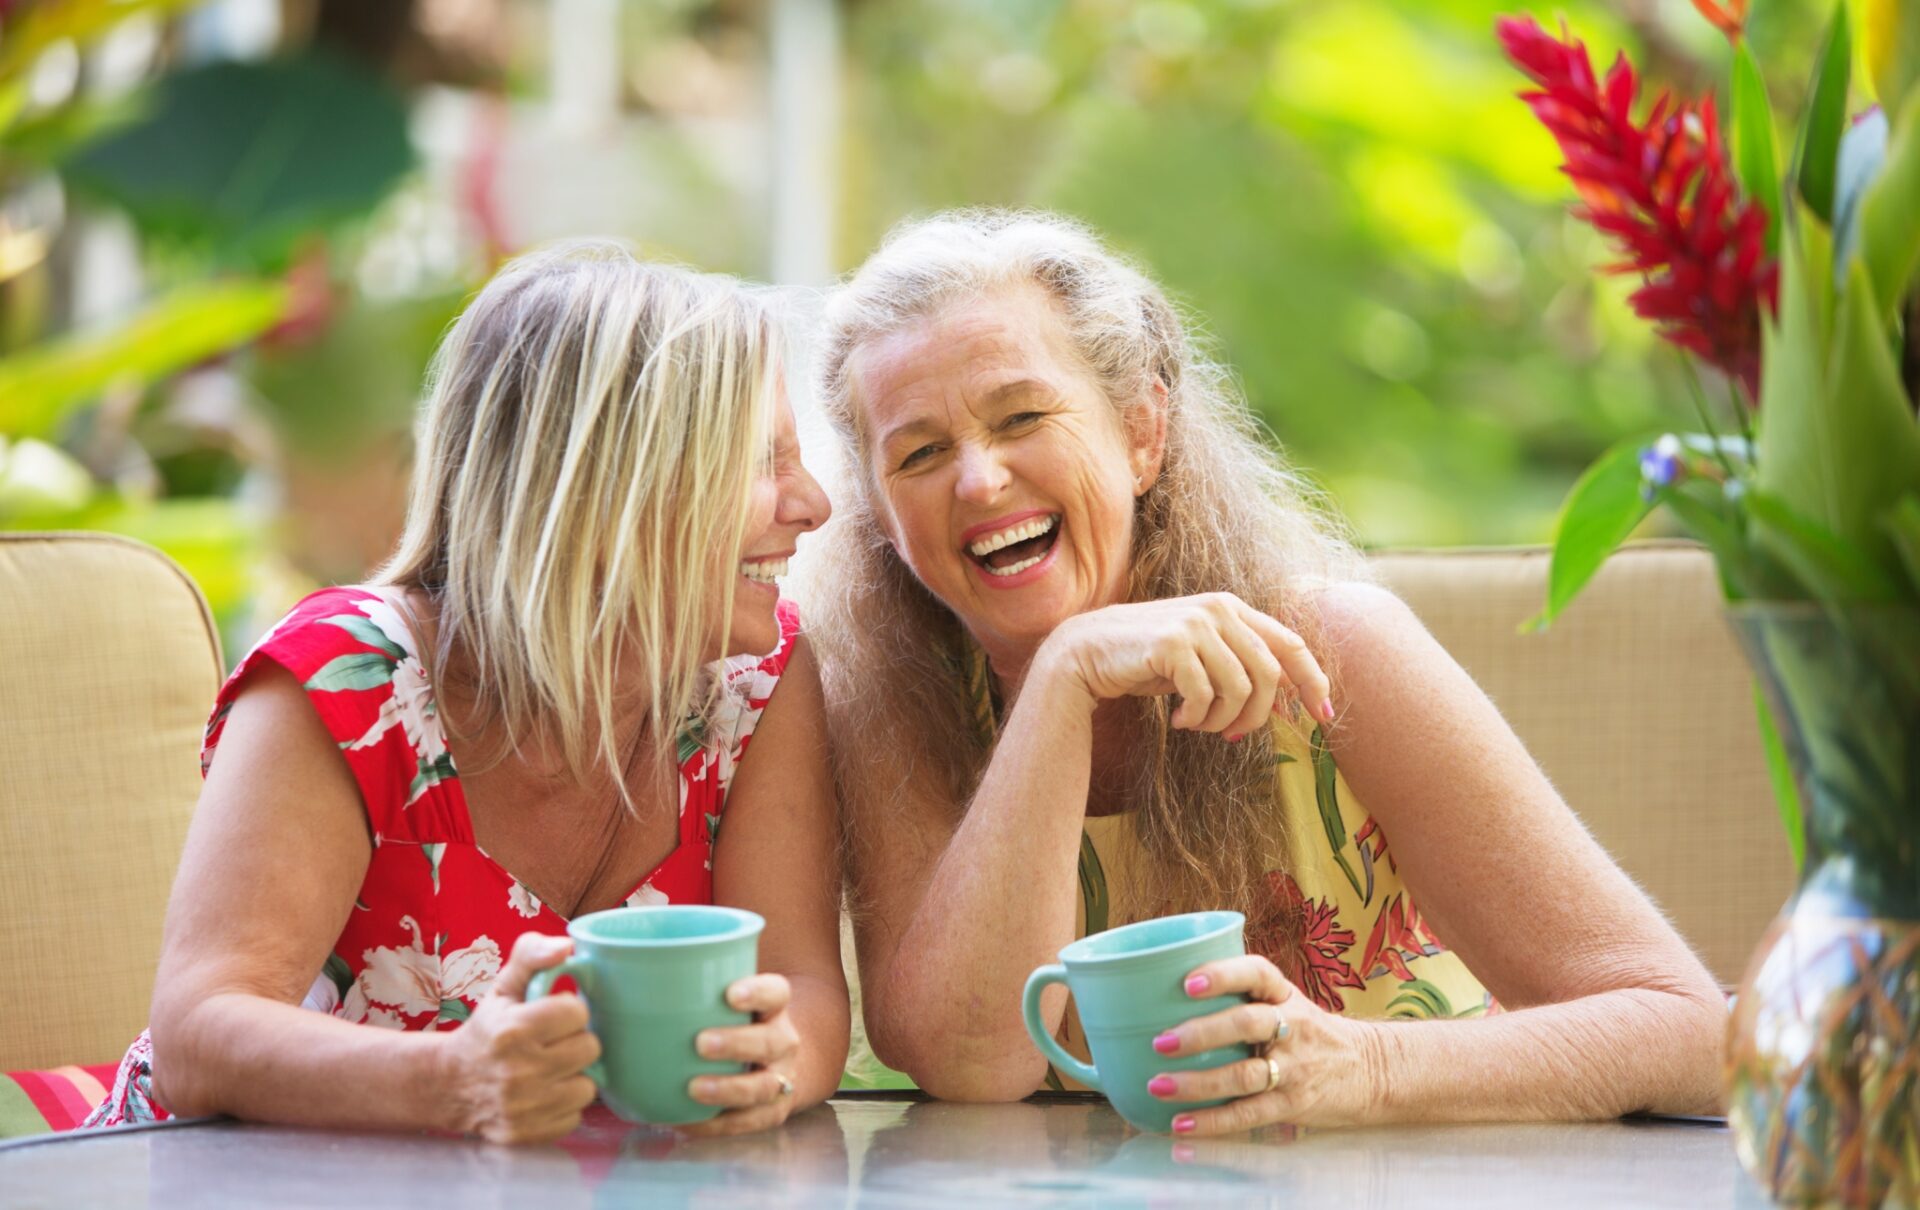 Two women share a laugh over cups of coffee